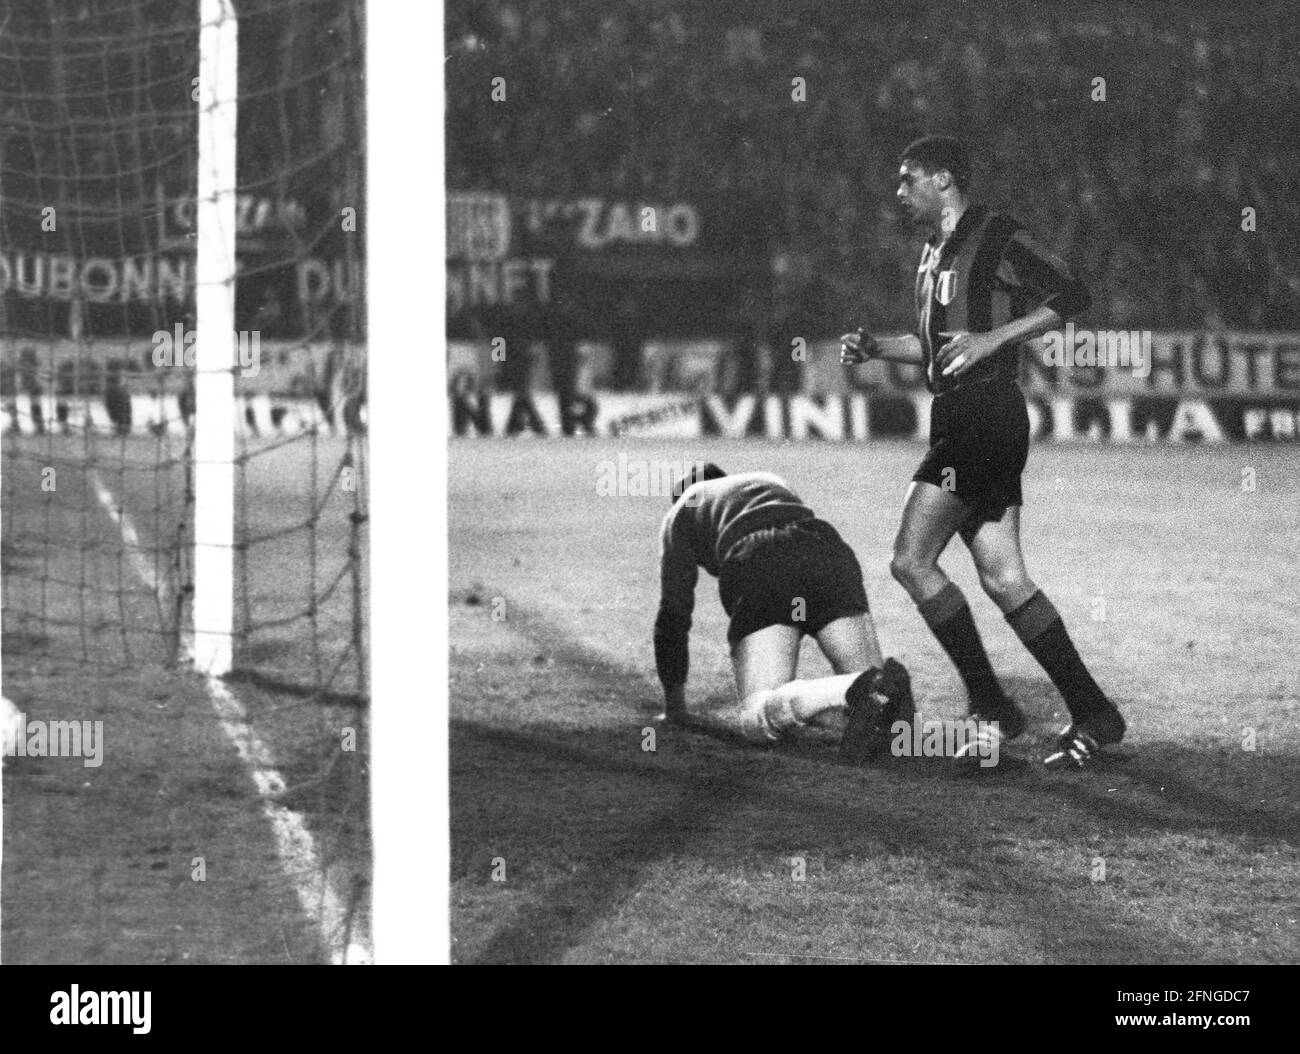 Final of the European Champion Clubs' Cup 1964: Inter Milan - Real Madrid  3:1/27.05.1964 in Vienna. Goalkeeper Jose Vicente (Real) disappointed on  the ground after conceding the second goal by Milani (not